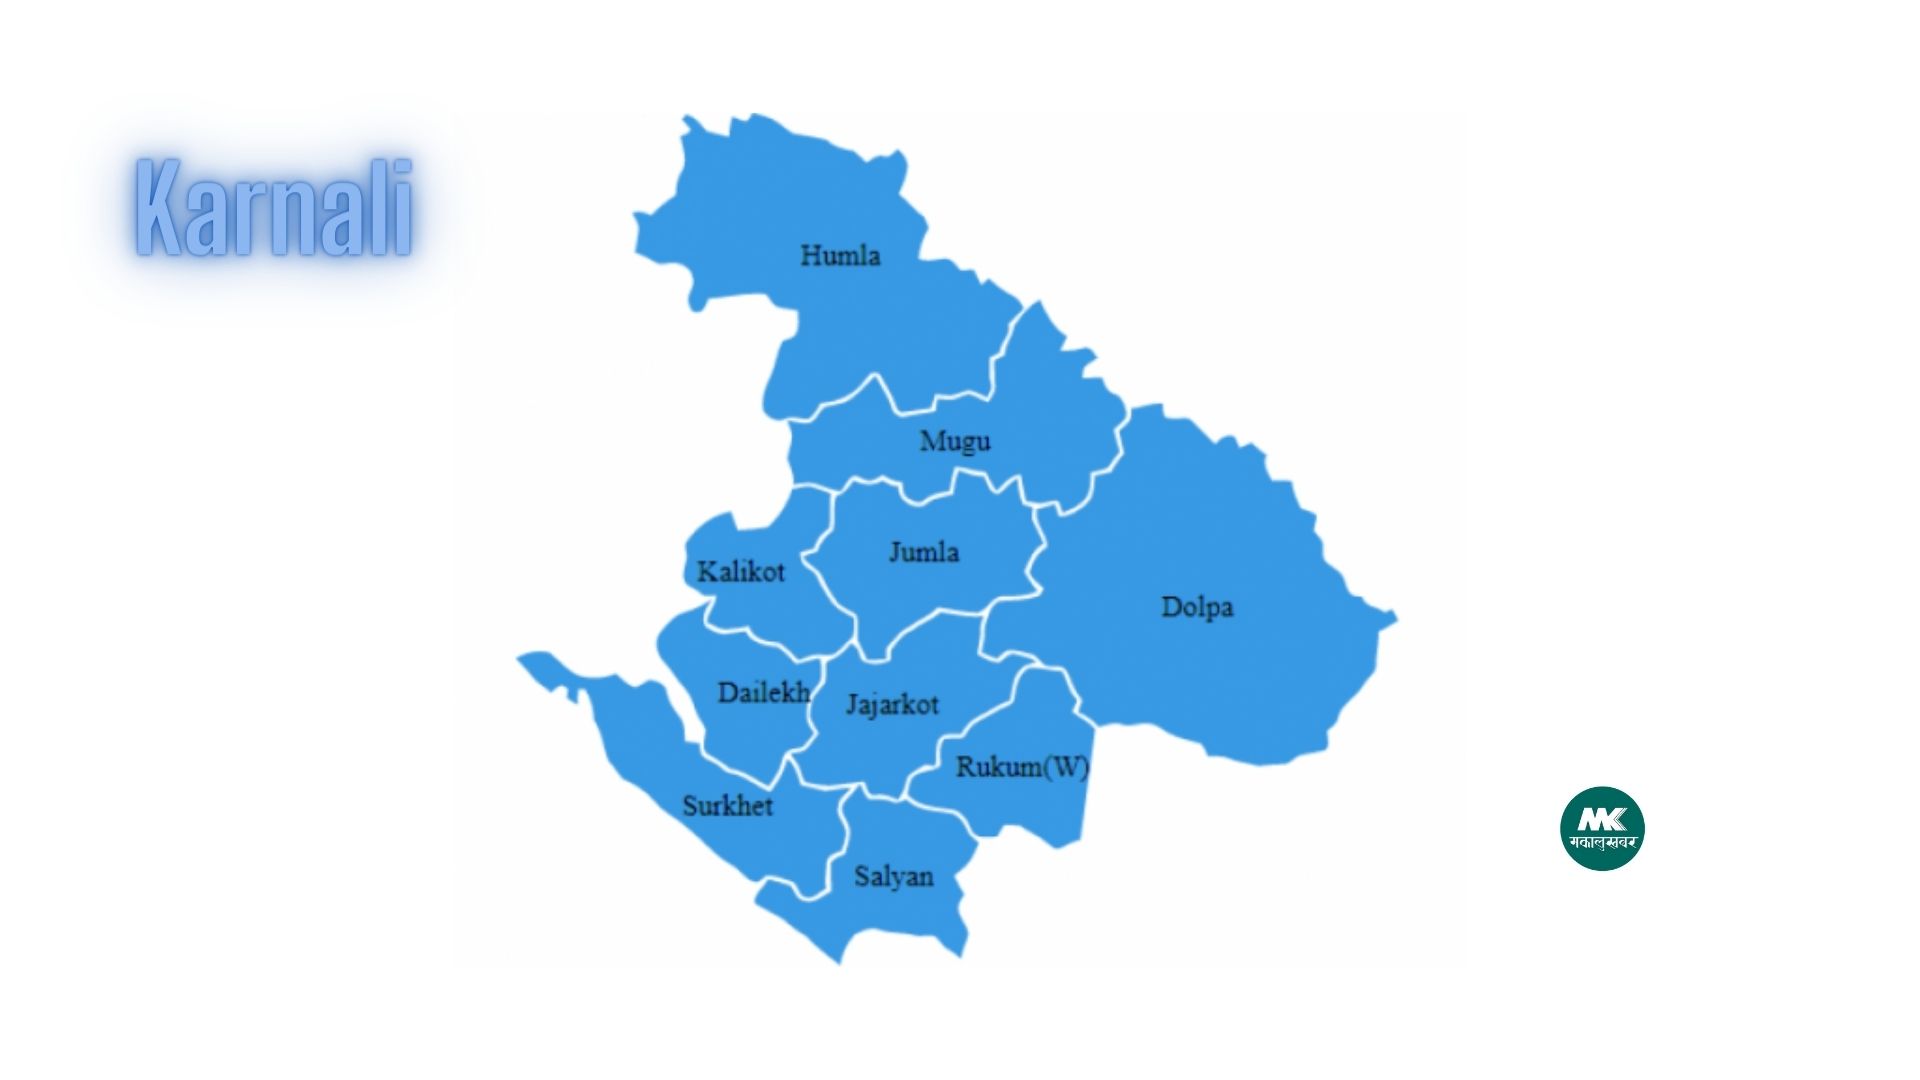 All candidates of ruling alliance win election in Karnali State